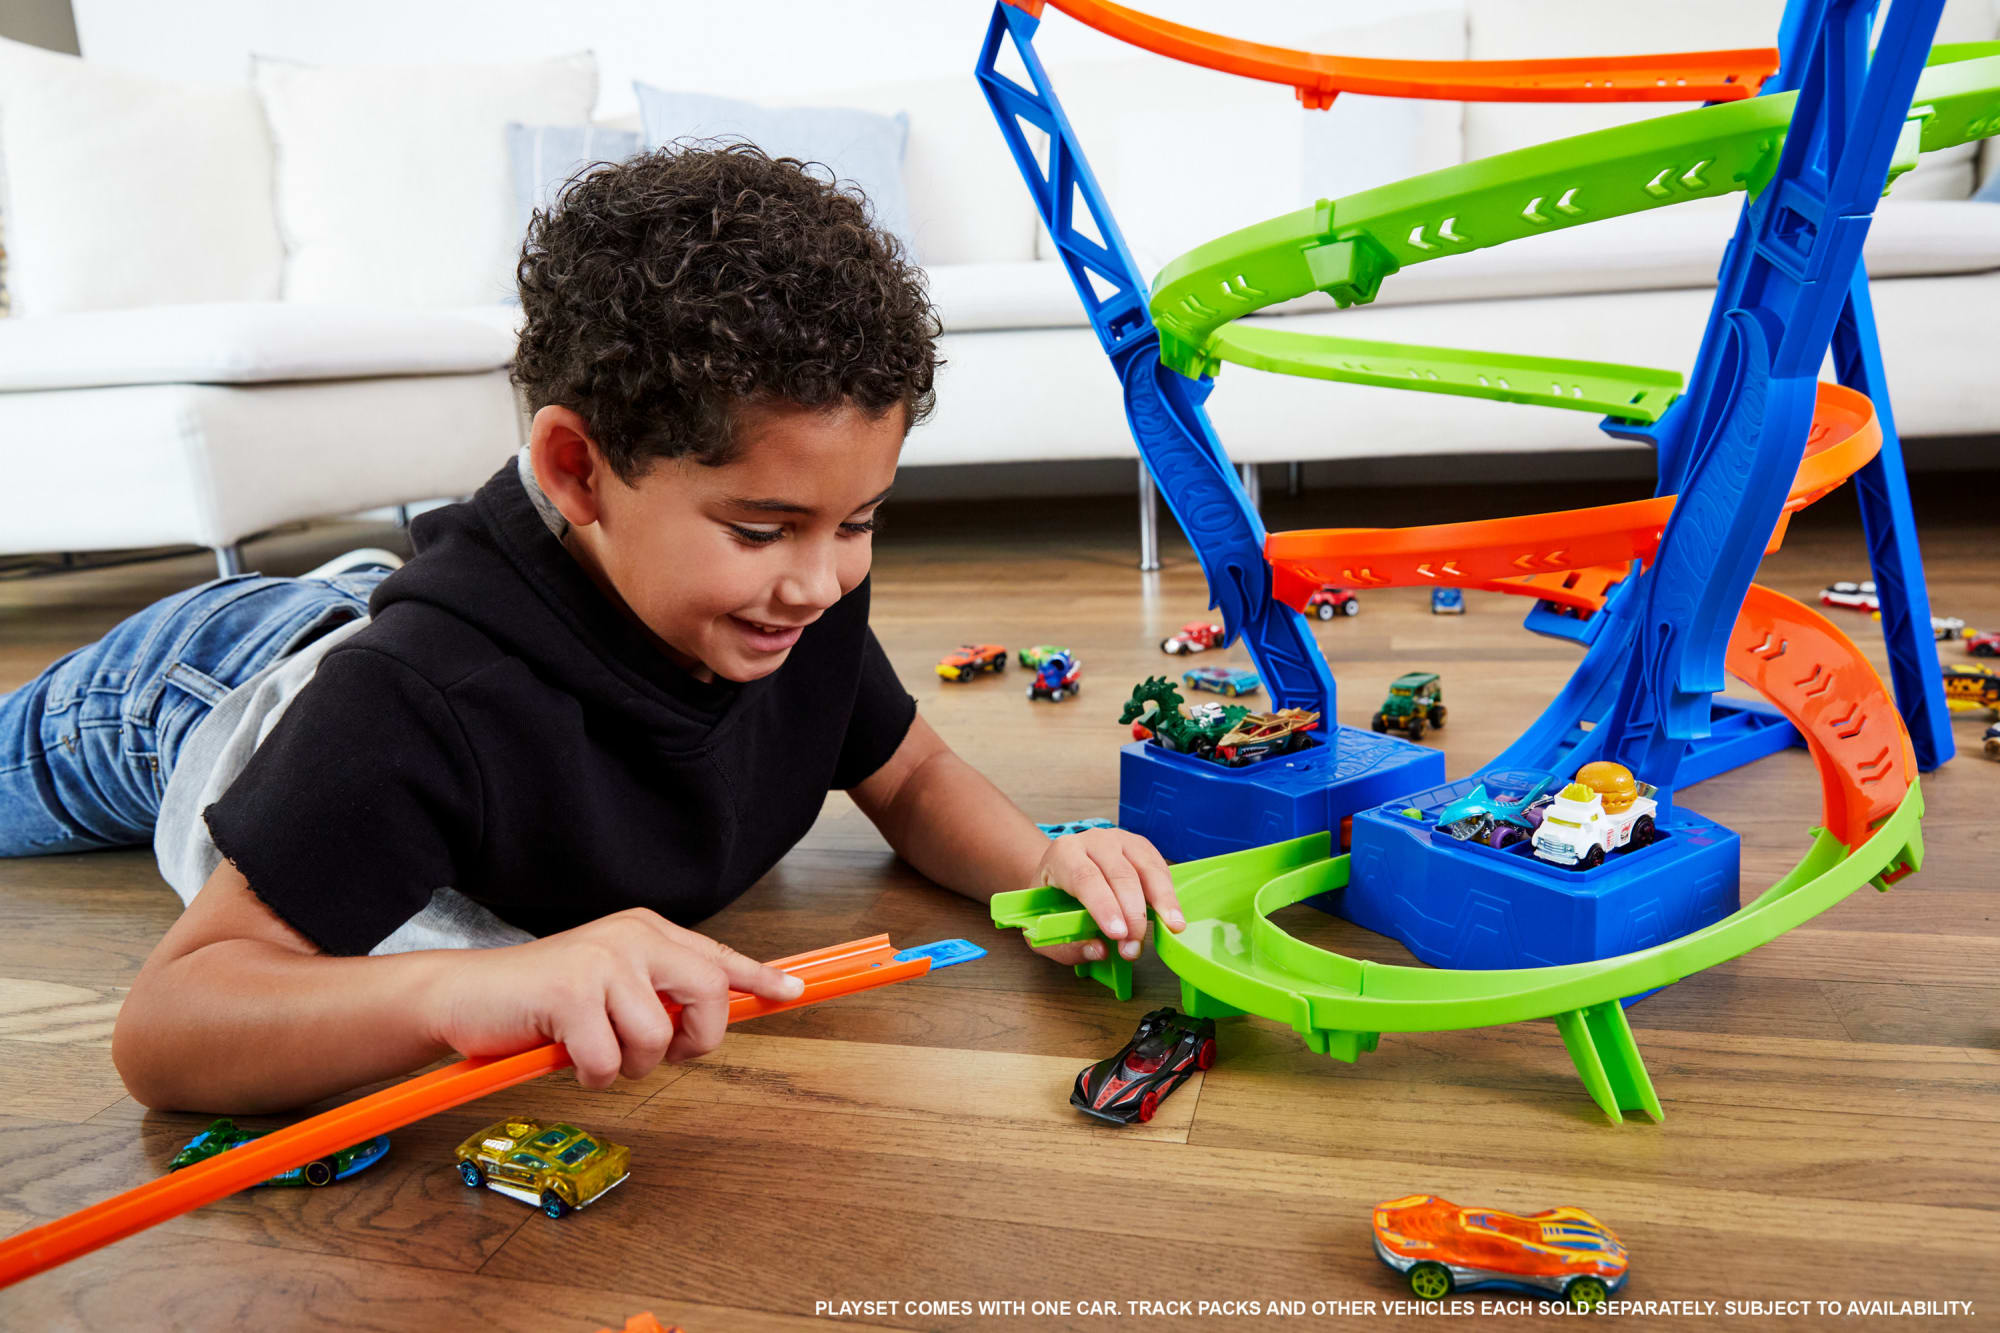  Hot Wheels Track Set and Toy Car, Large-Scale